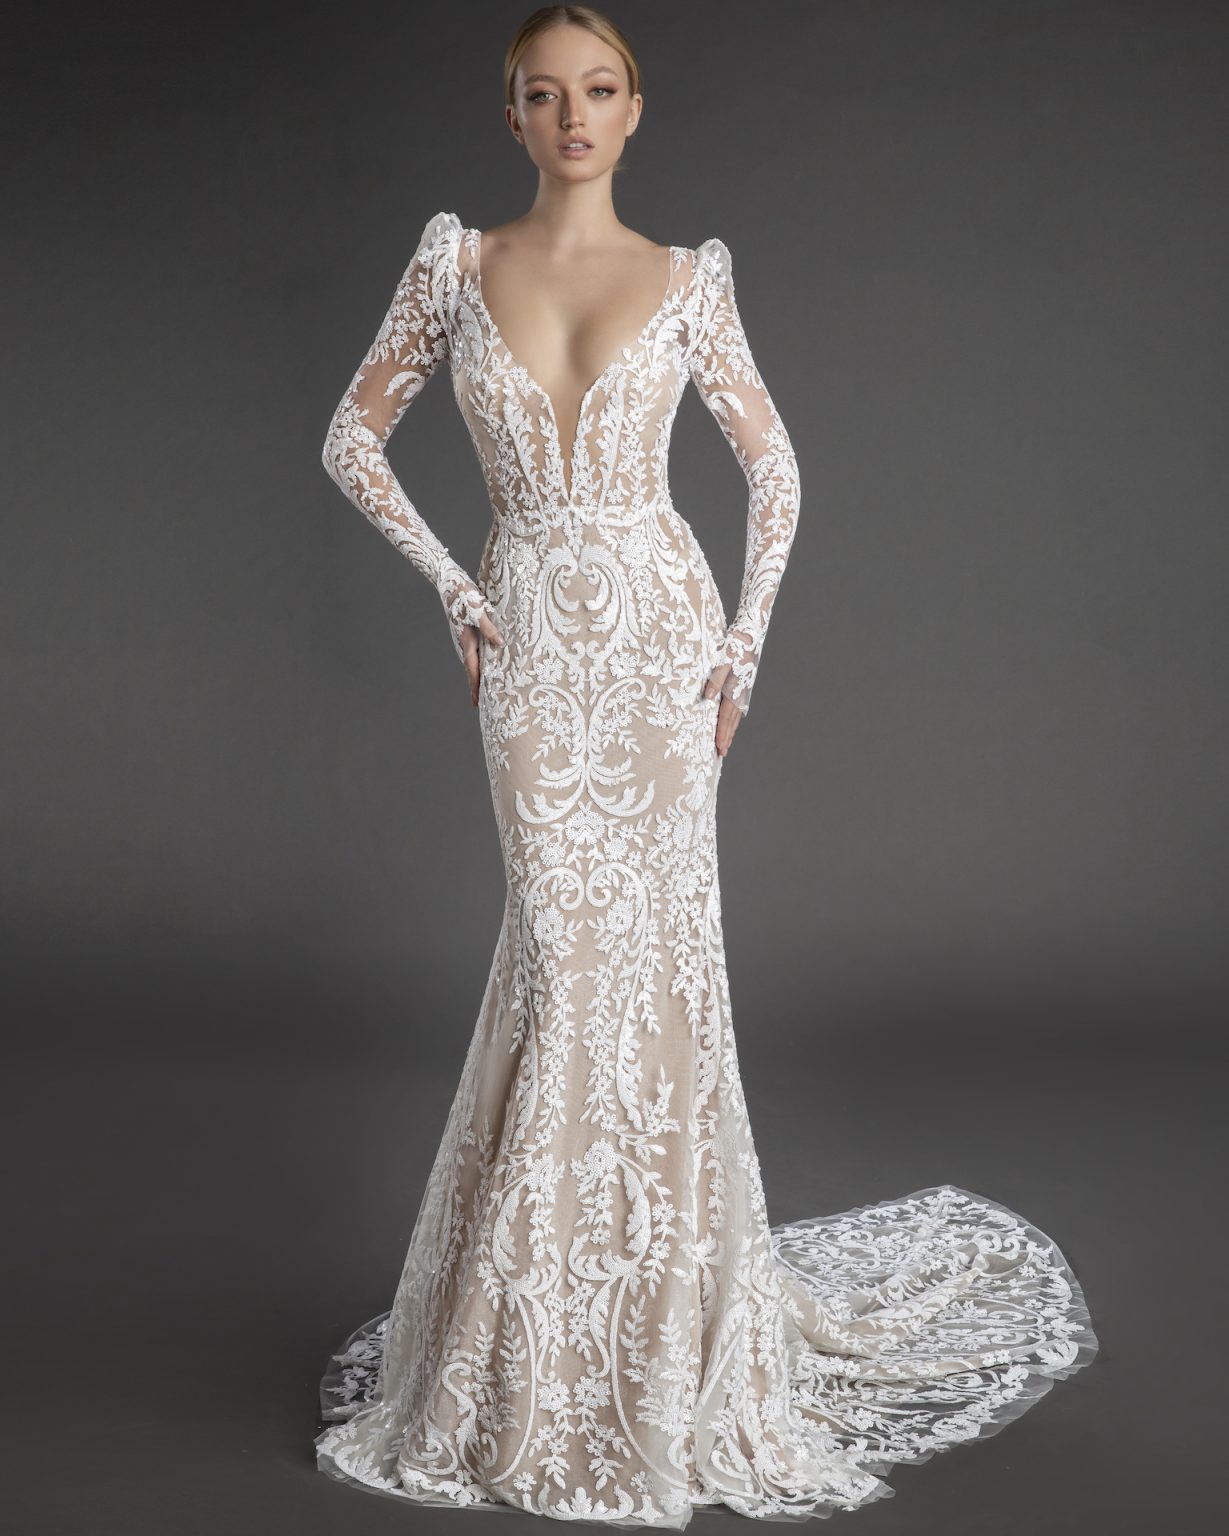 All Over Lace Long Puff Sleeve Sheath Wedding Dress With Plunging V Neckline Kleinfeld Bridal 7444